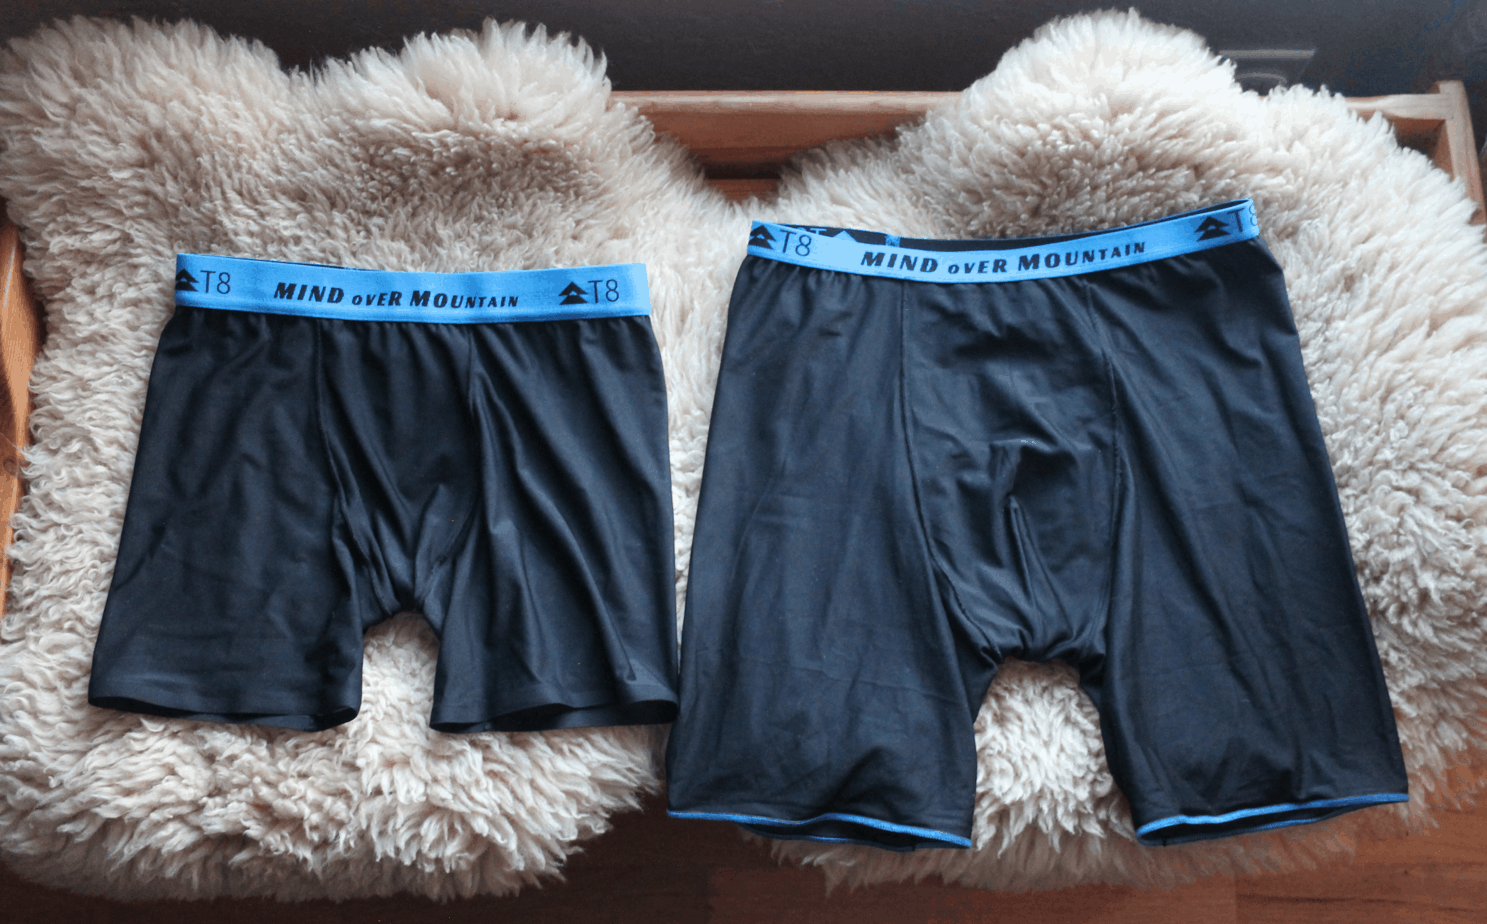 T8 Commando Underwear Review - Gearselected